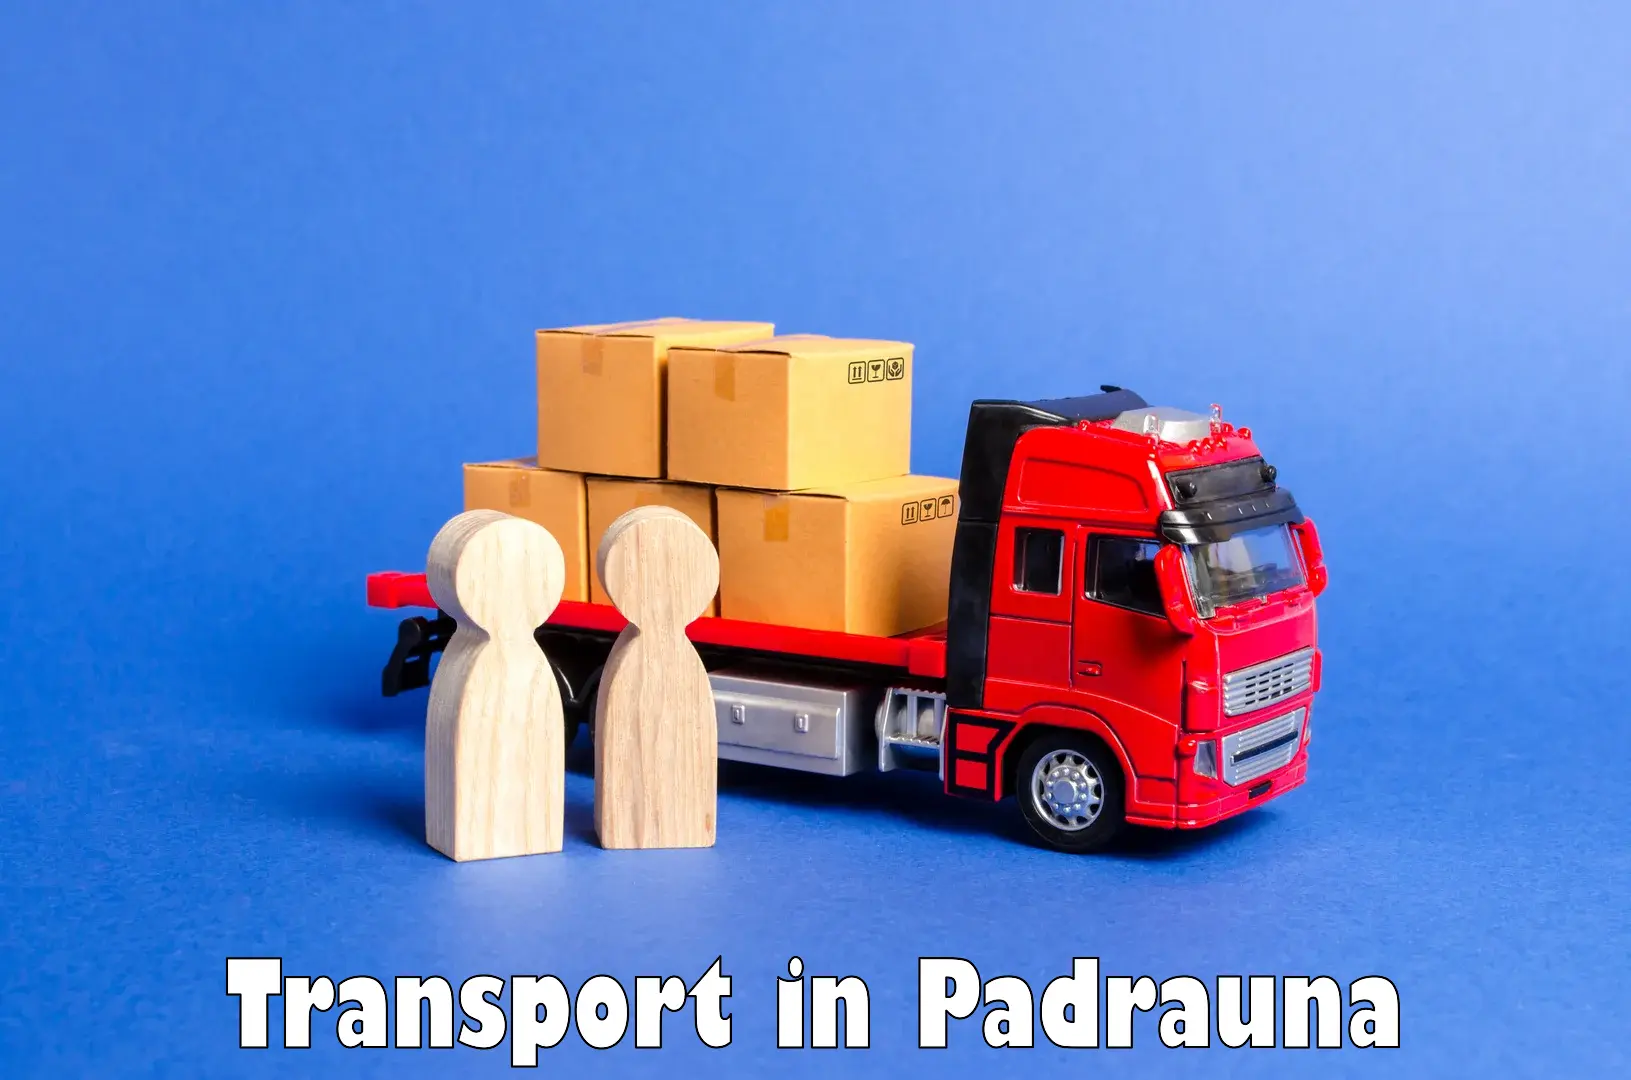 Container transportation services in Padrauna